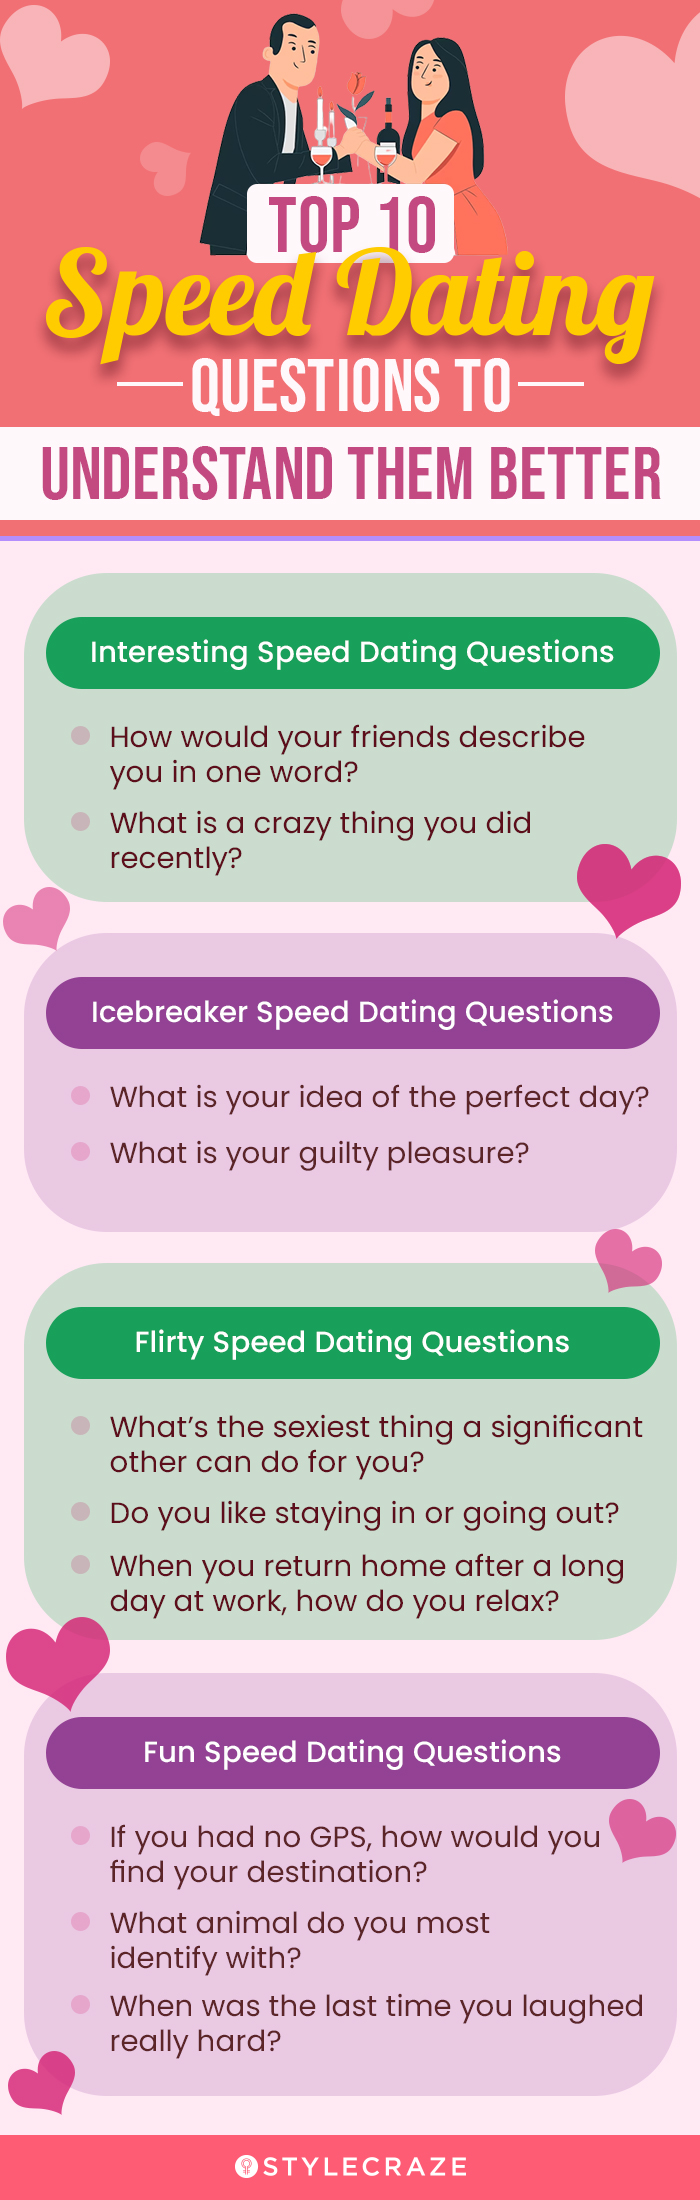 top 10 speed dating questions to understand them better (infographic)